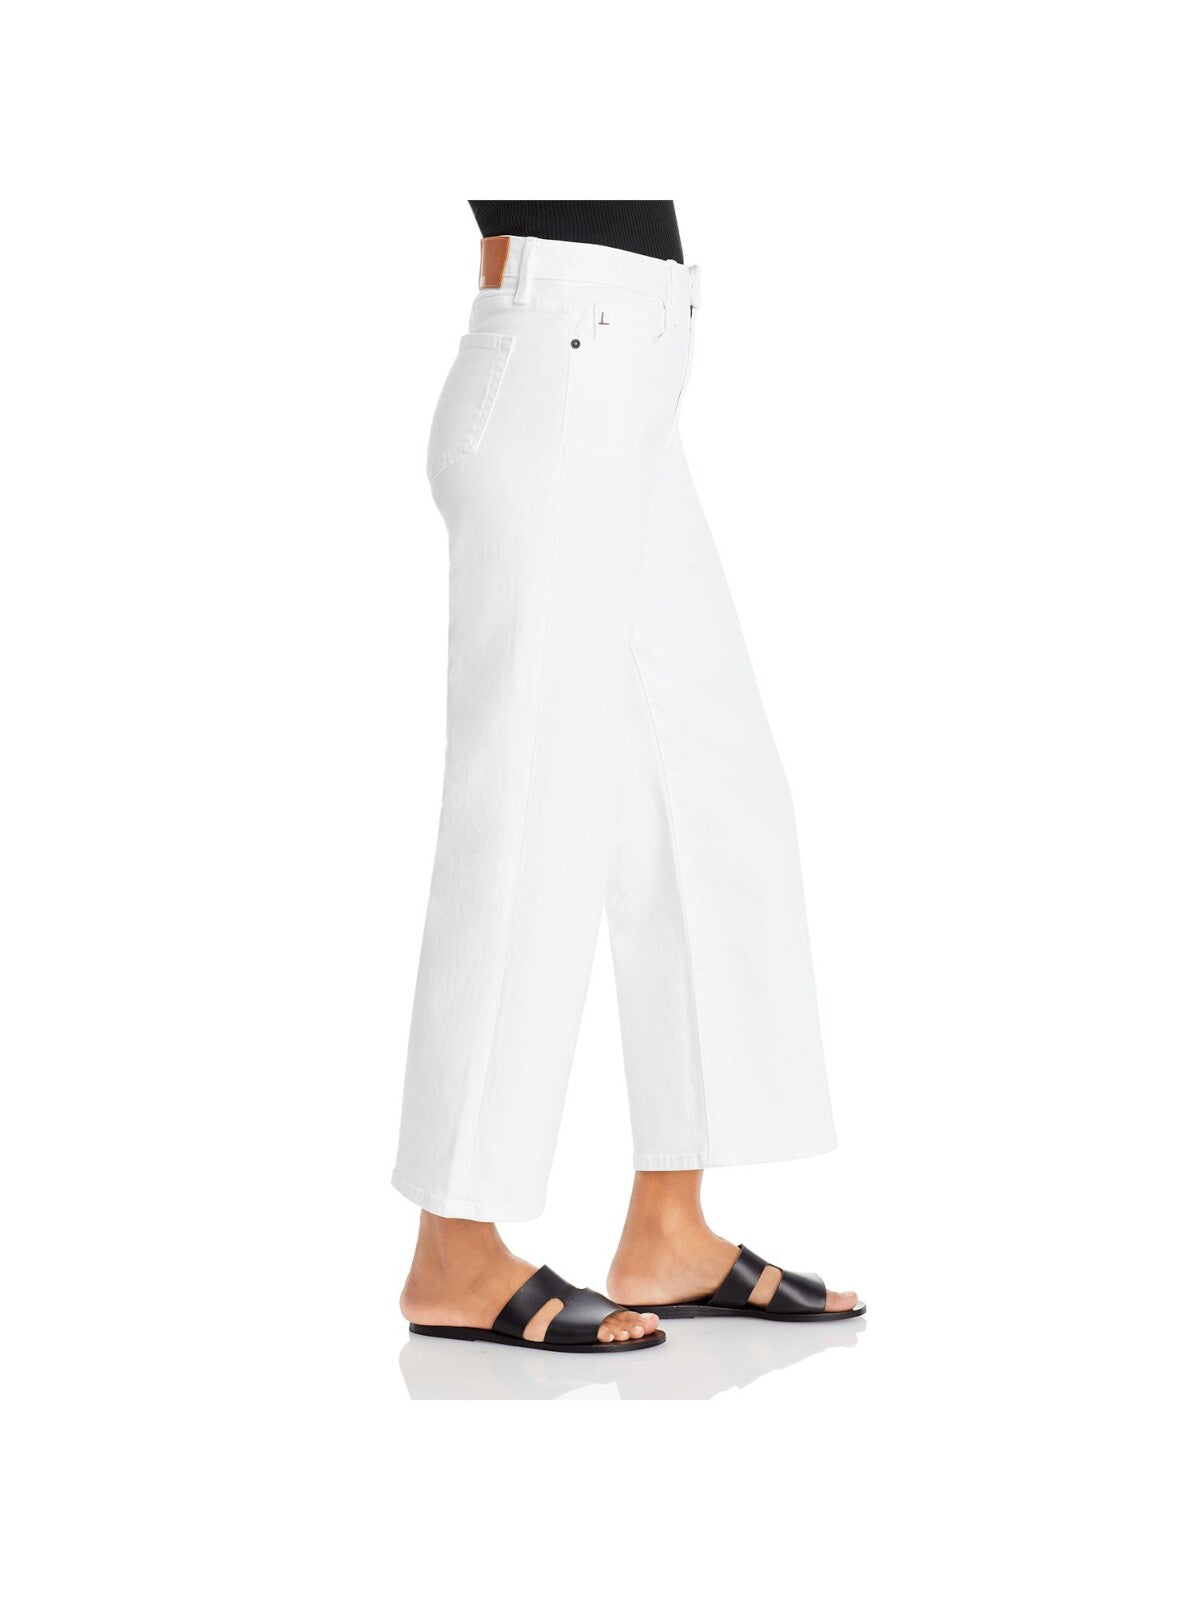 LAFAYETTE 148 Womens White Stretch Zippered Pocketed Slightly Cropped Wide-leg High Waist Jeans 30